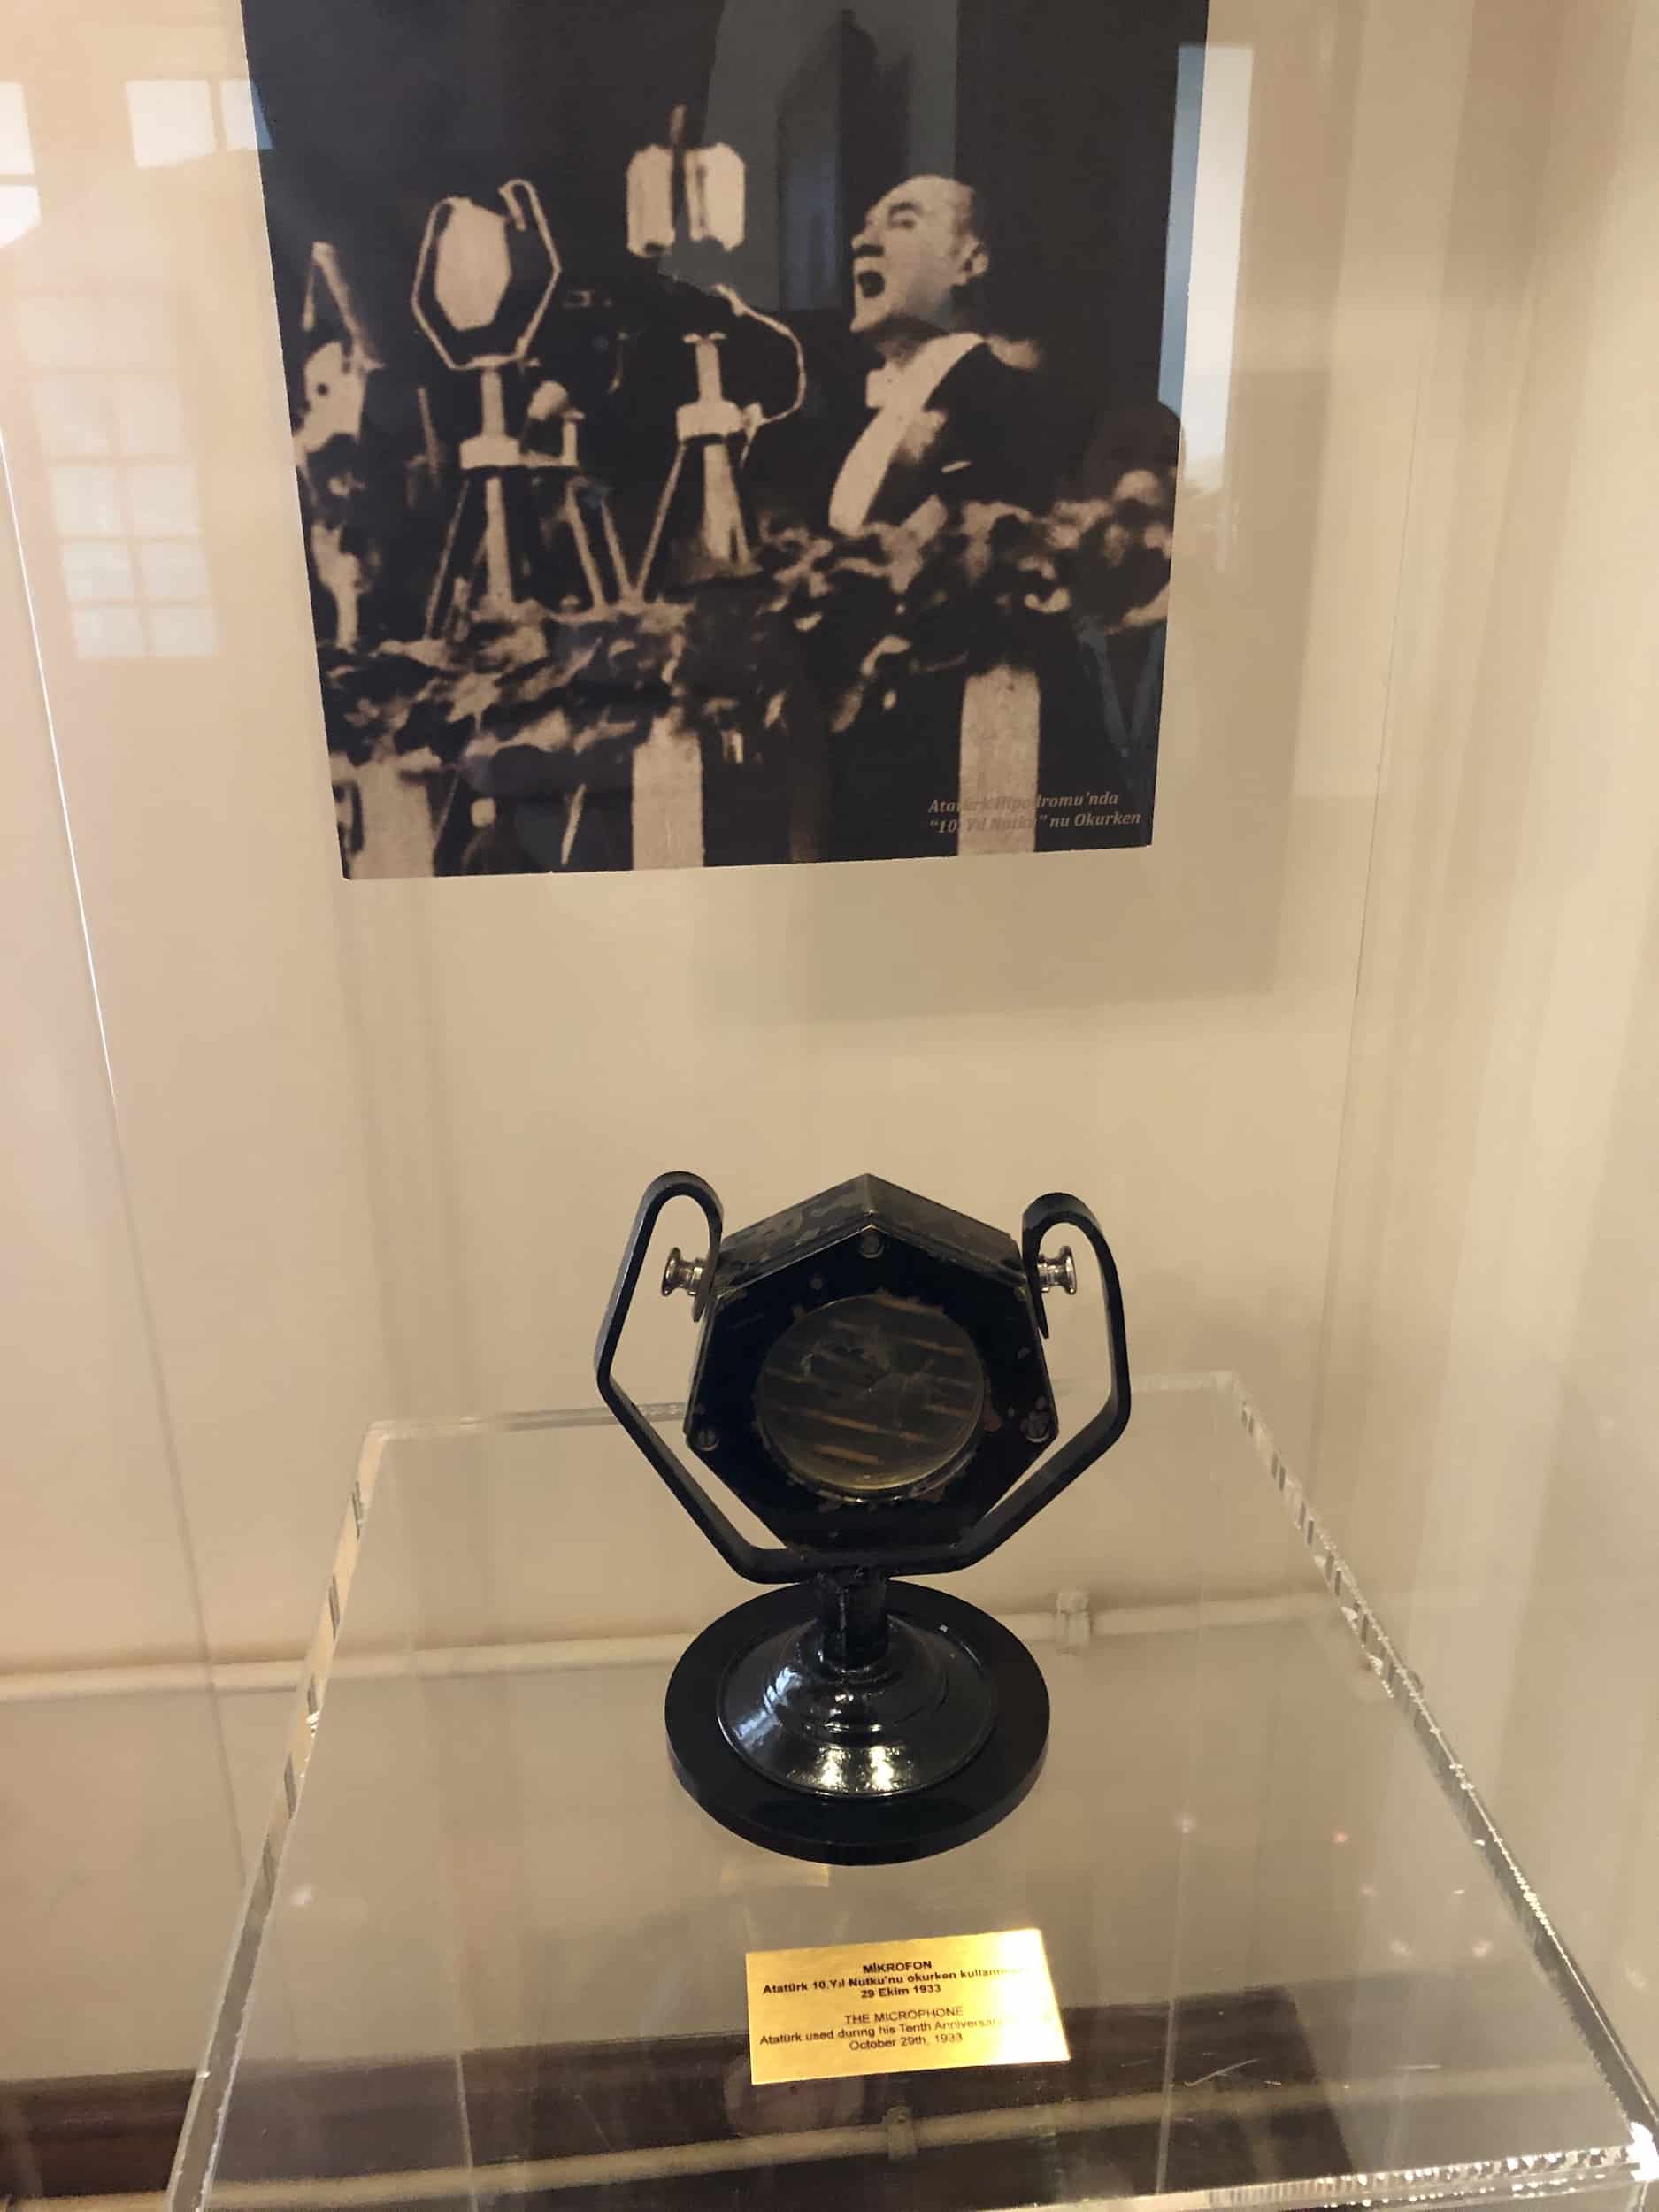 Microphone used by Atatürk during his Tenth Year Speech on October 29, 1933 at the Republic Museum at the Second Grand National Assembly of Turkey in Ulus, Ankara, Turkey